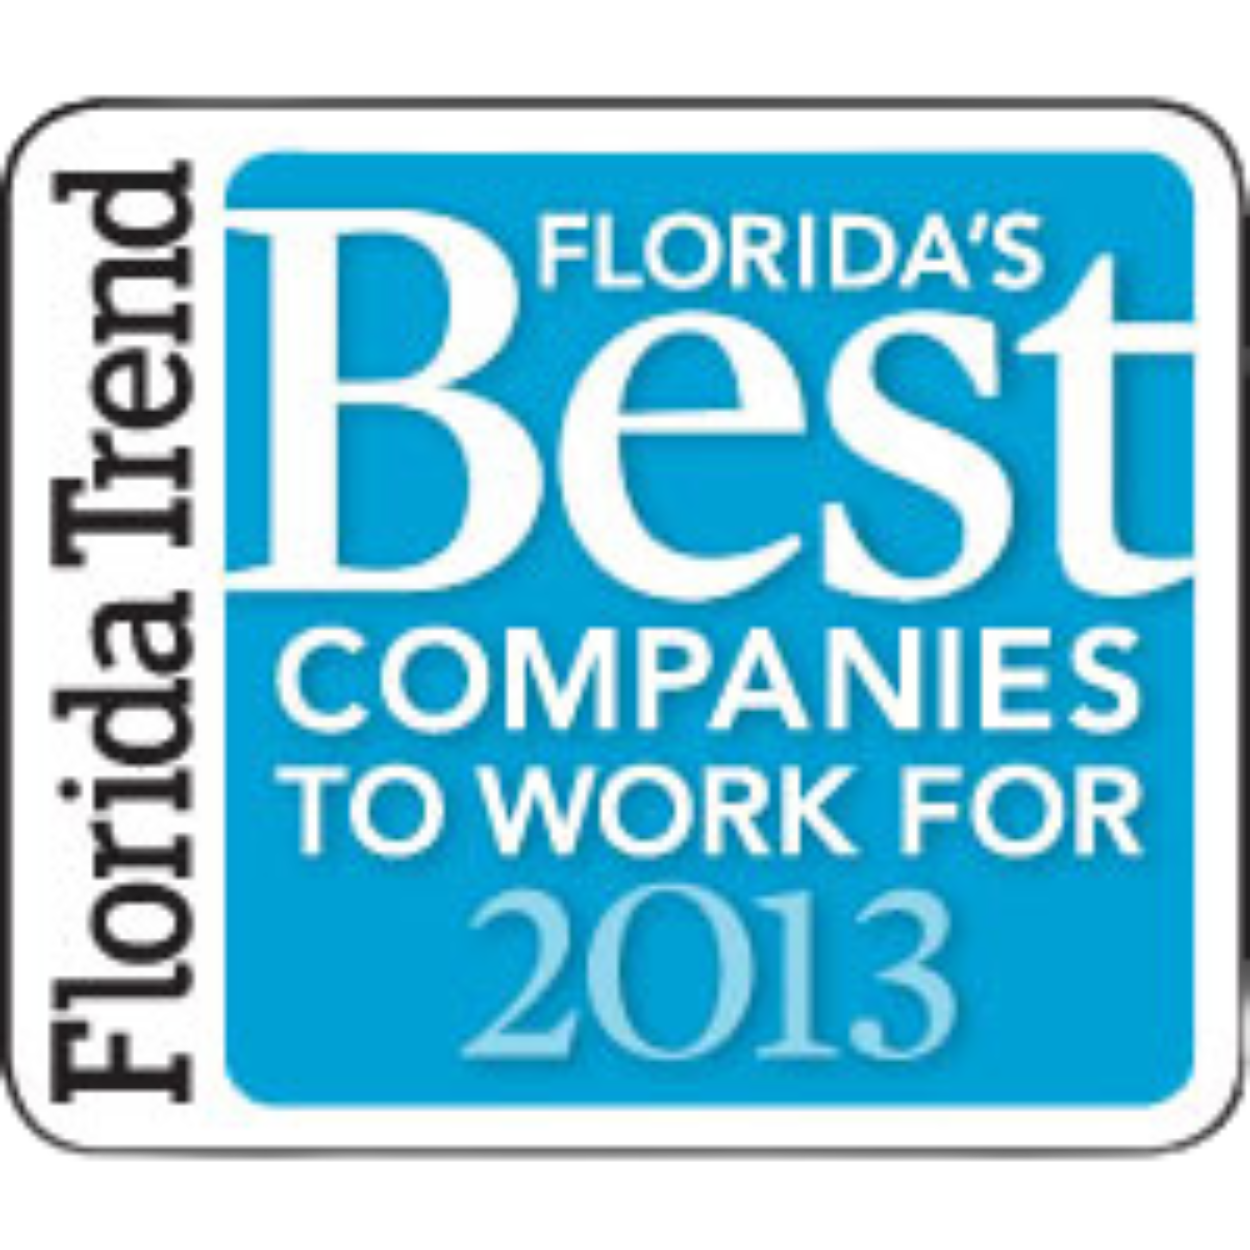 2013 best companies to work for